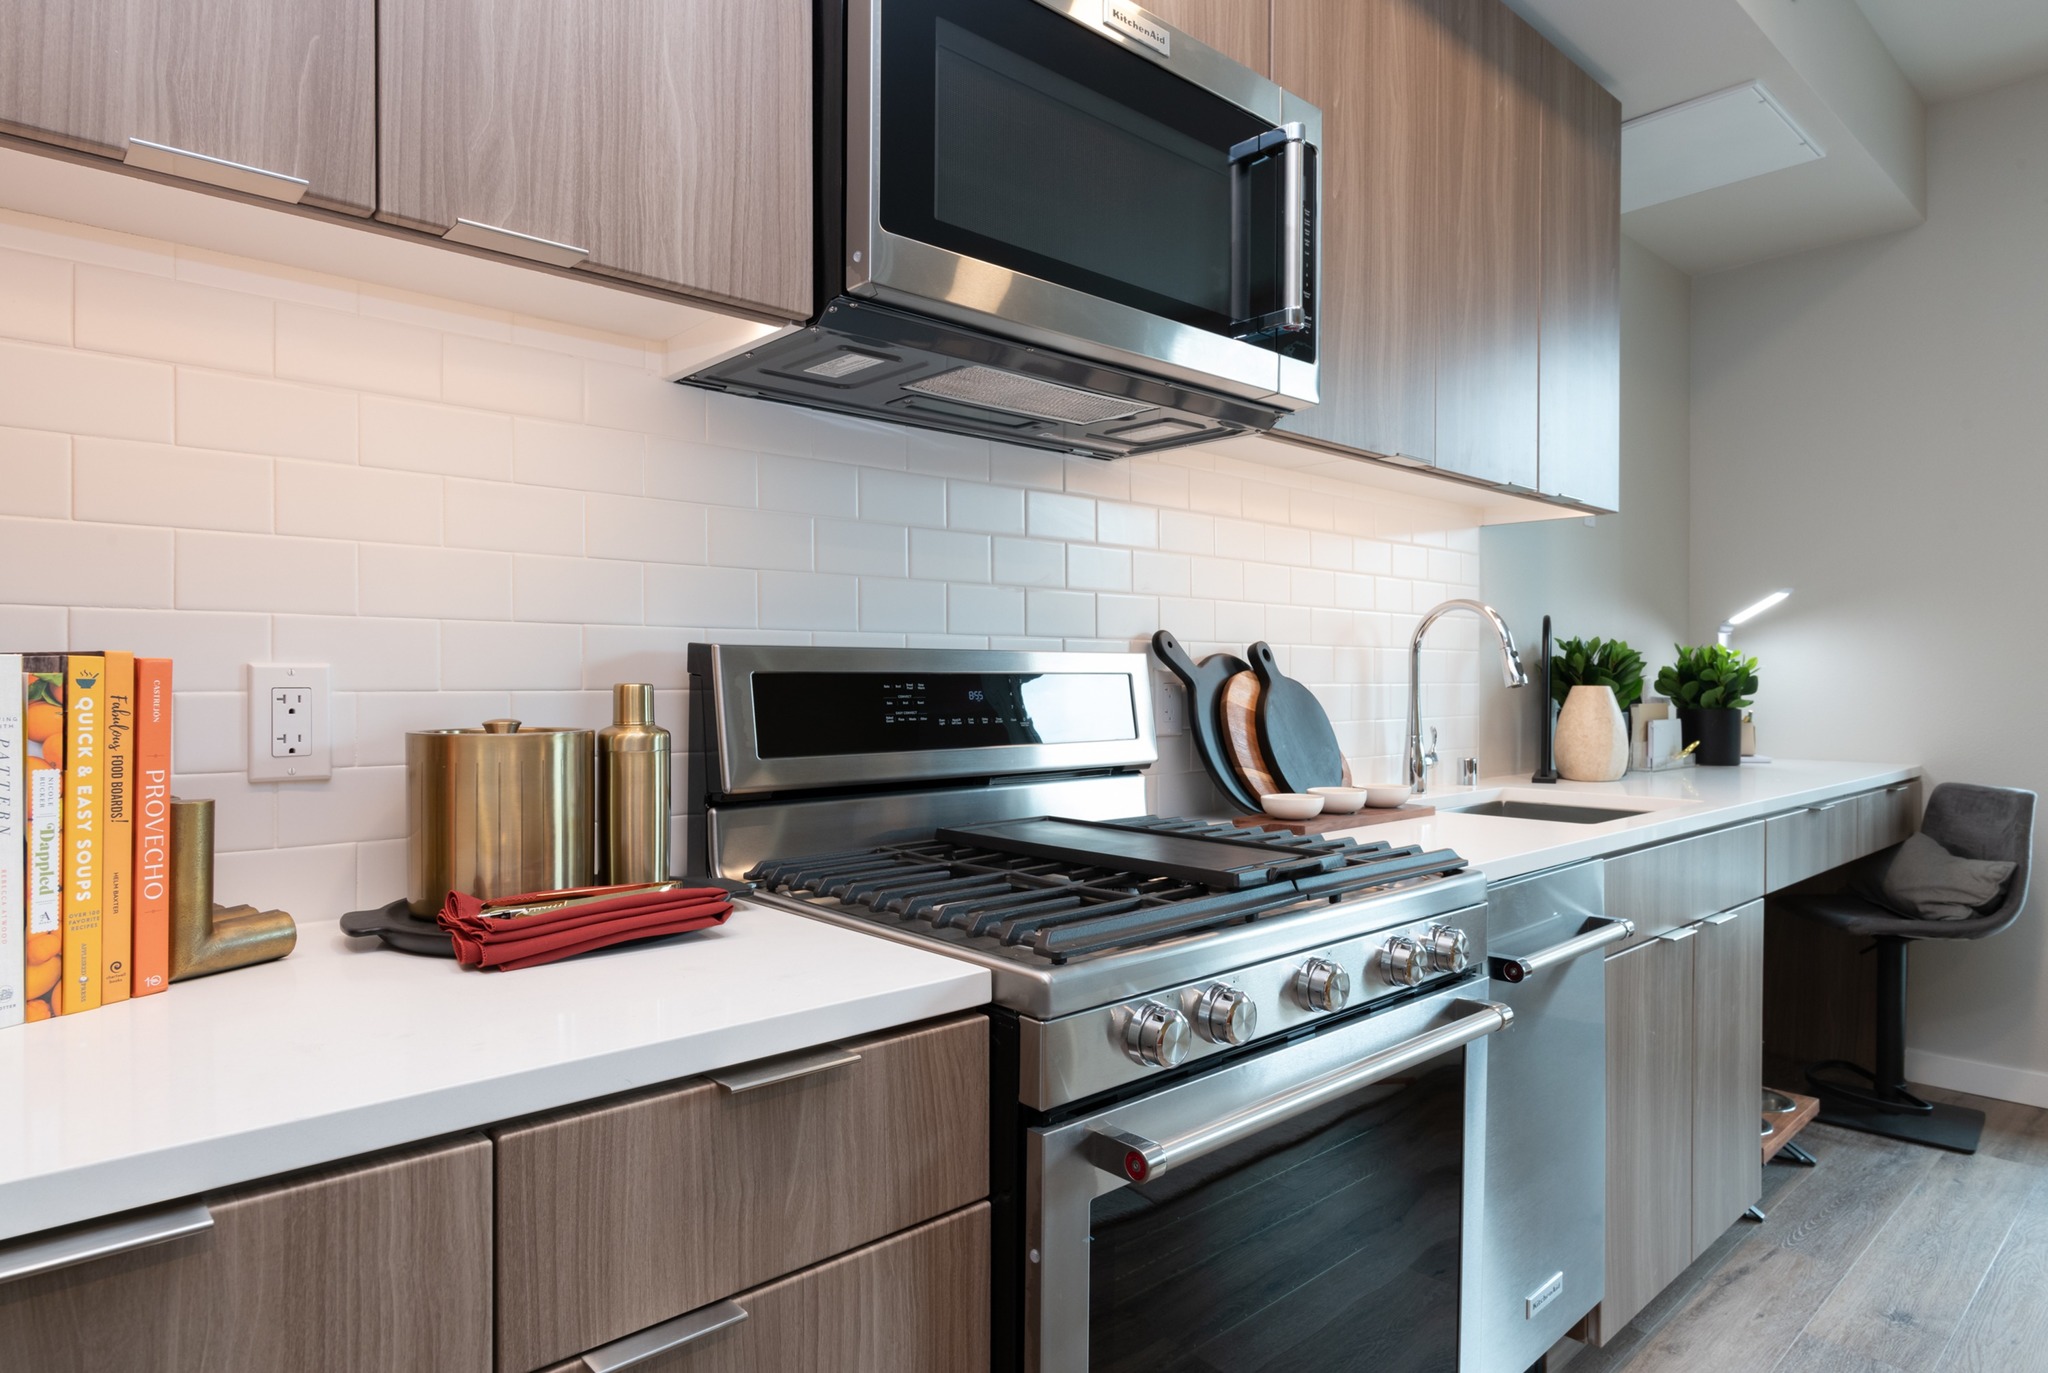 Stainless Steel Energy Star® Appliances